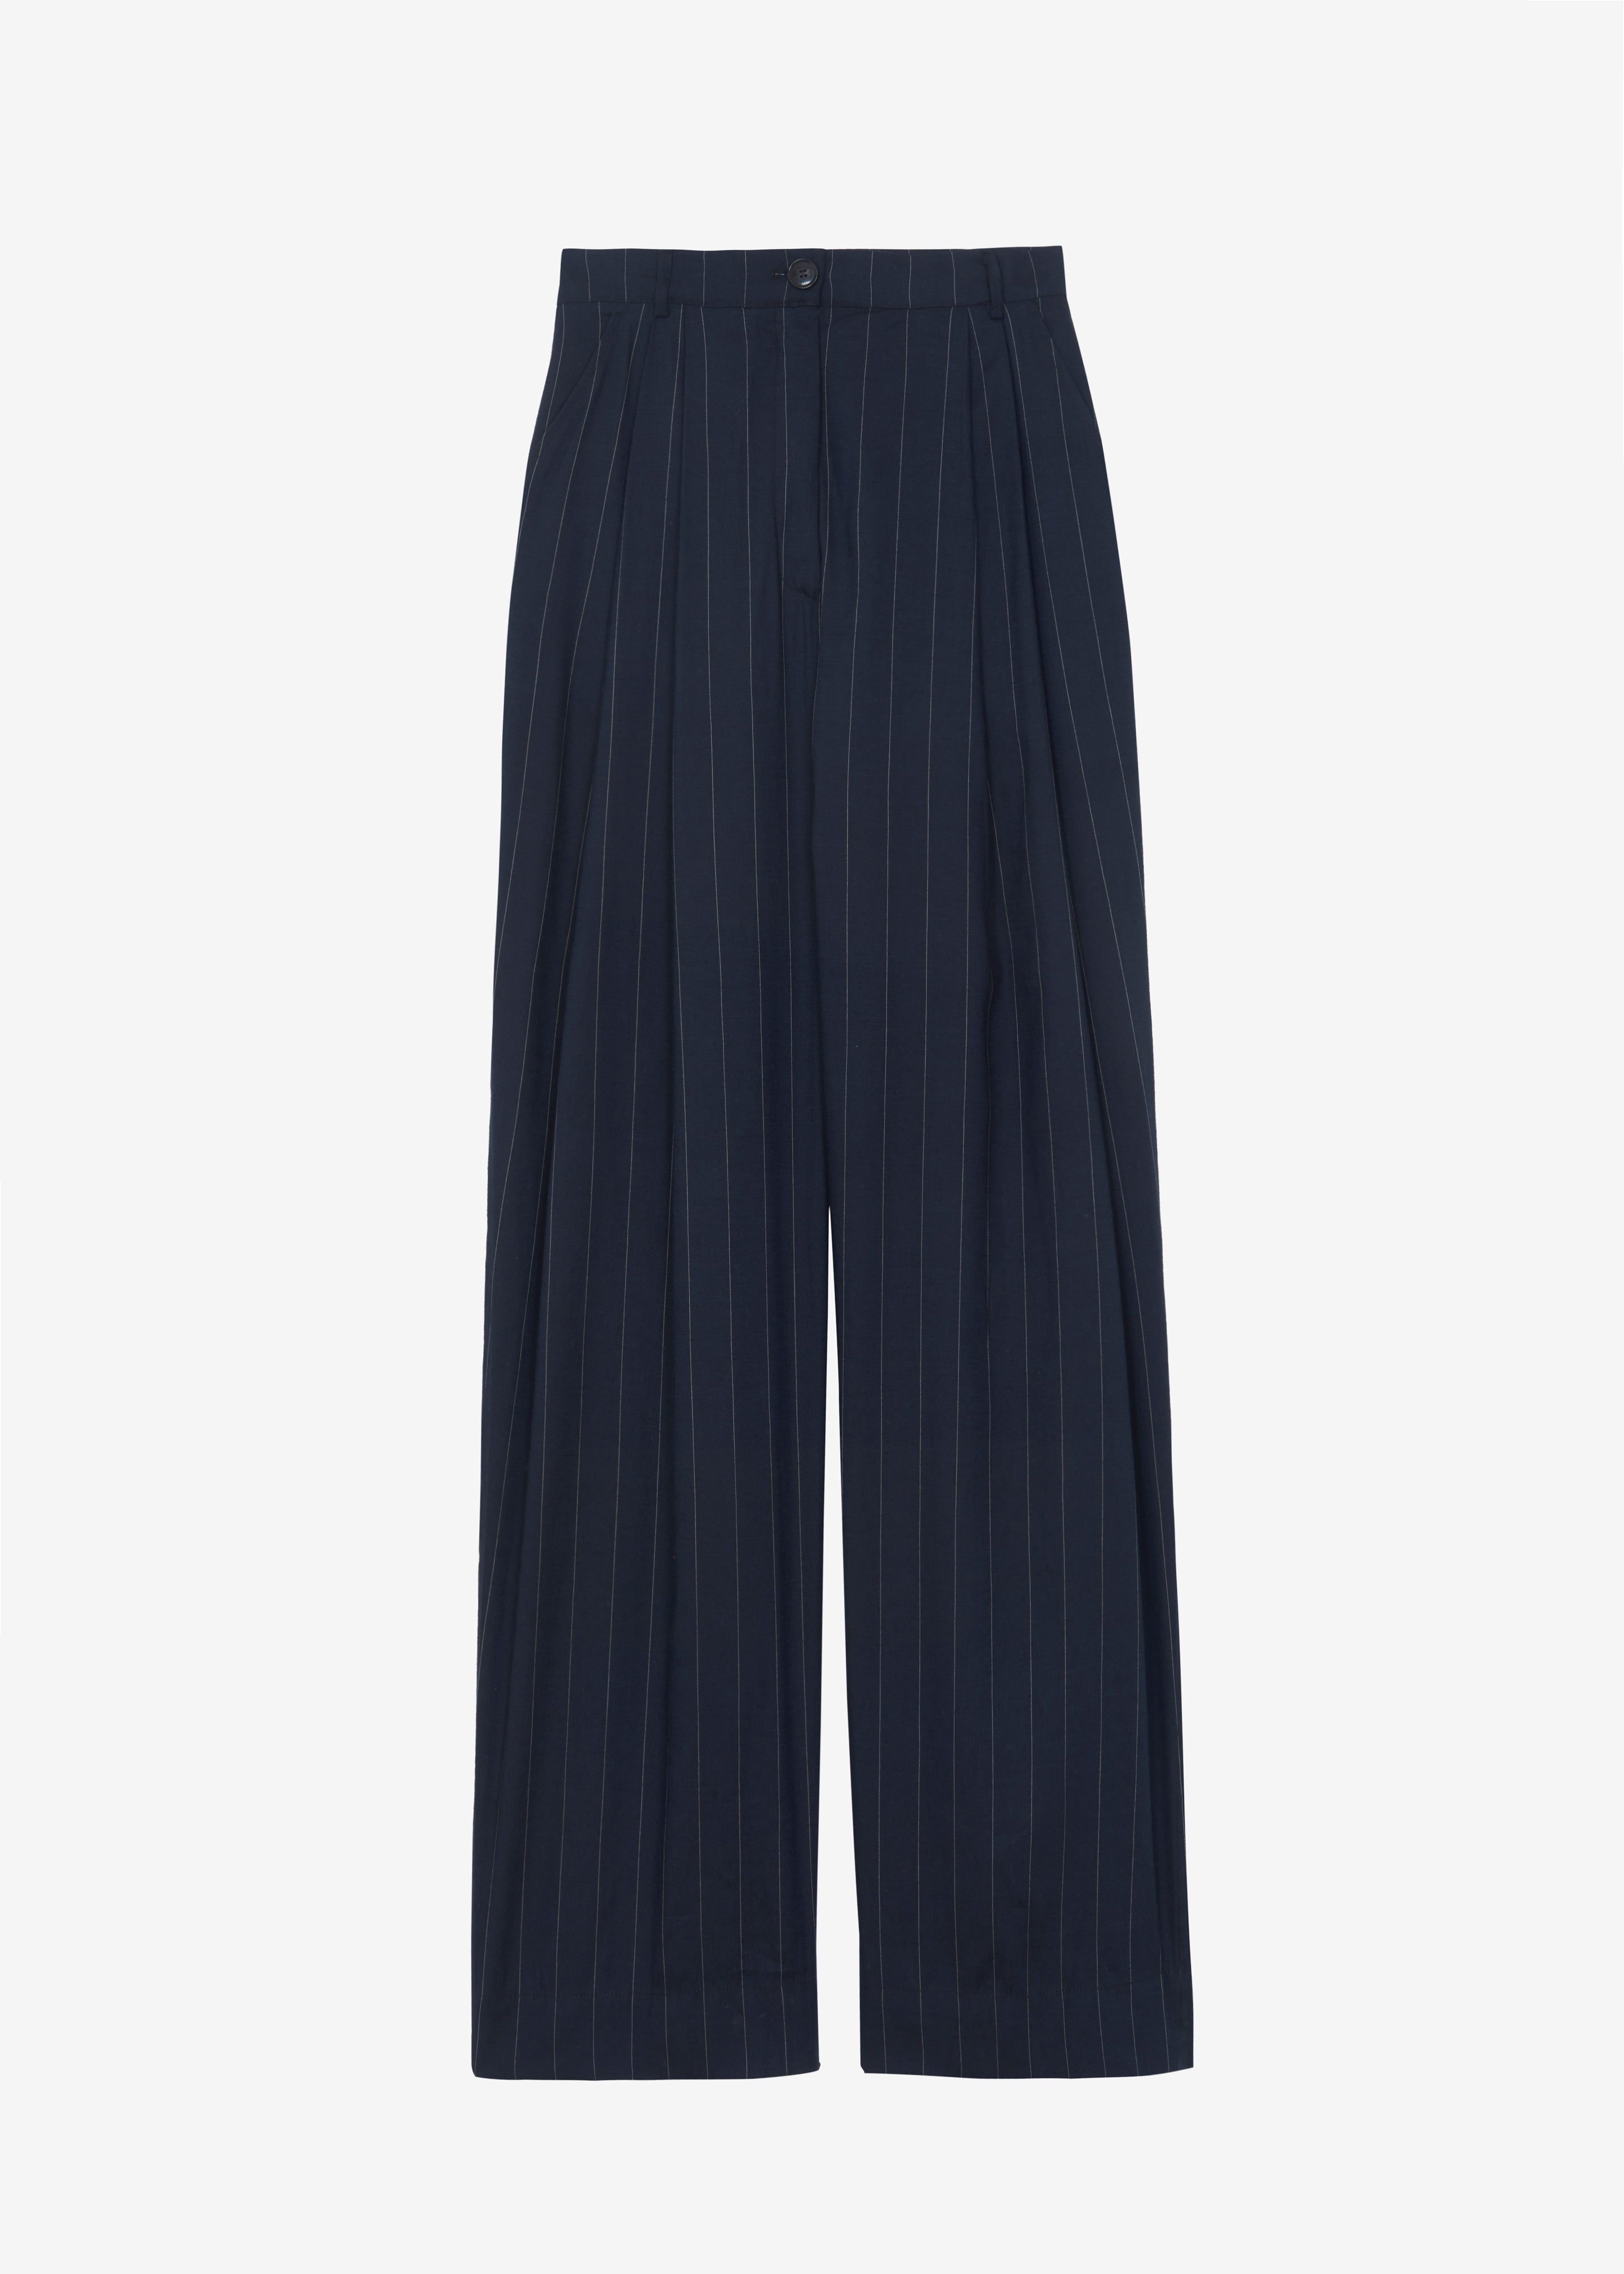 Piper Pleated Trousers - Navy/Beige Pinstripe - 8